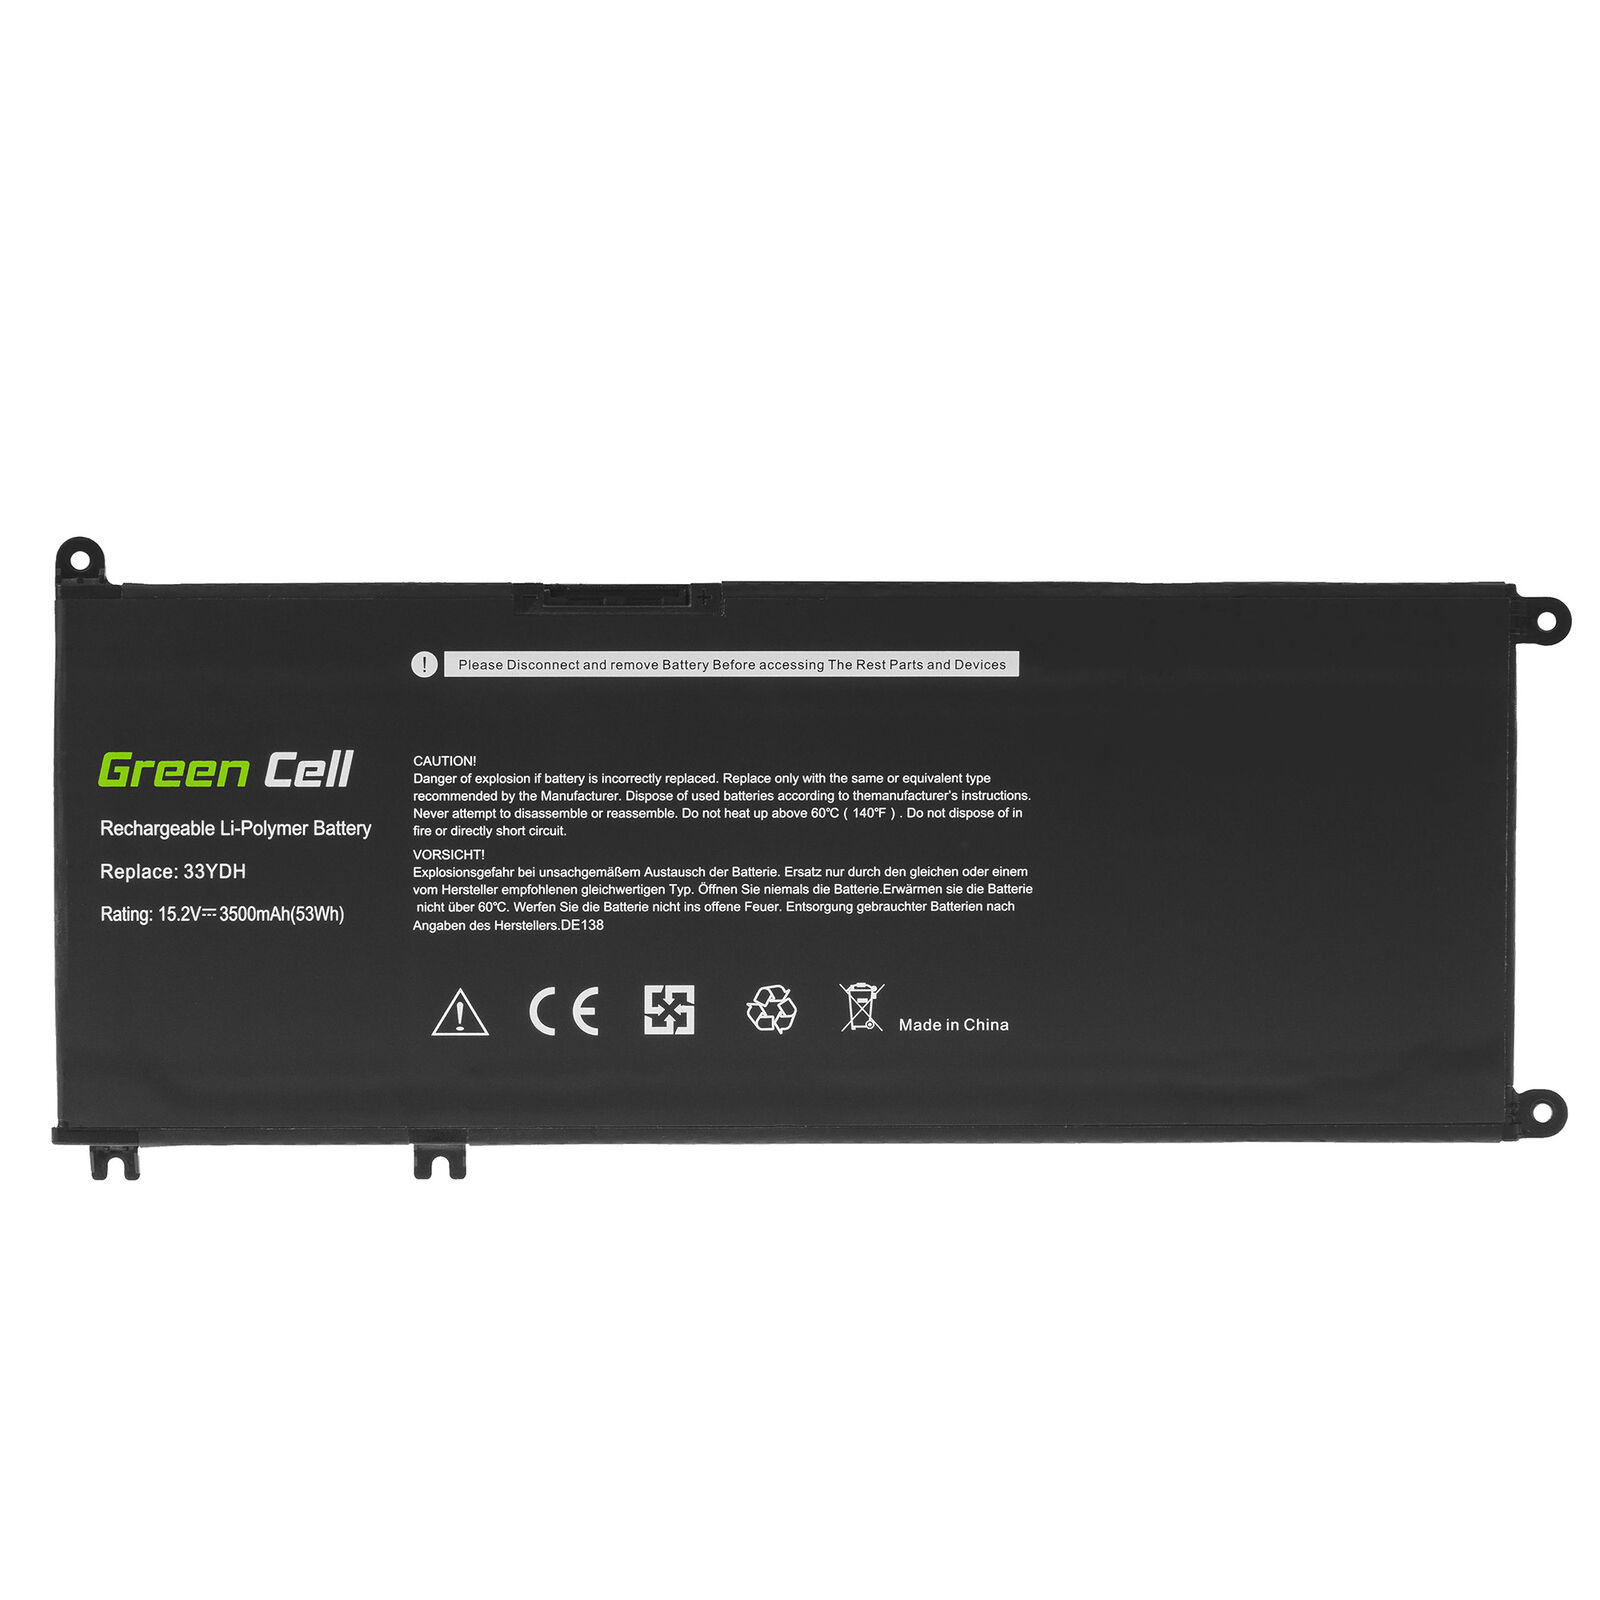 Dell Latitude 3380 3480 3490 3580 3590 99NF2 33YDH W7NKD compatible battery